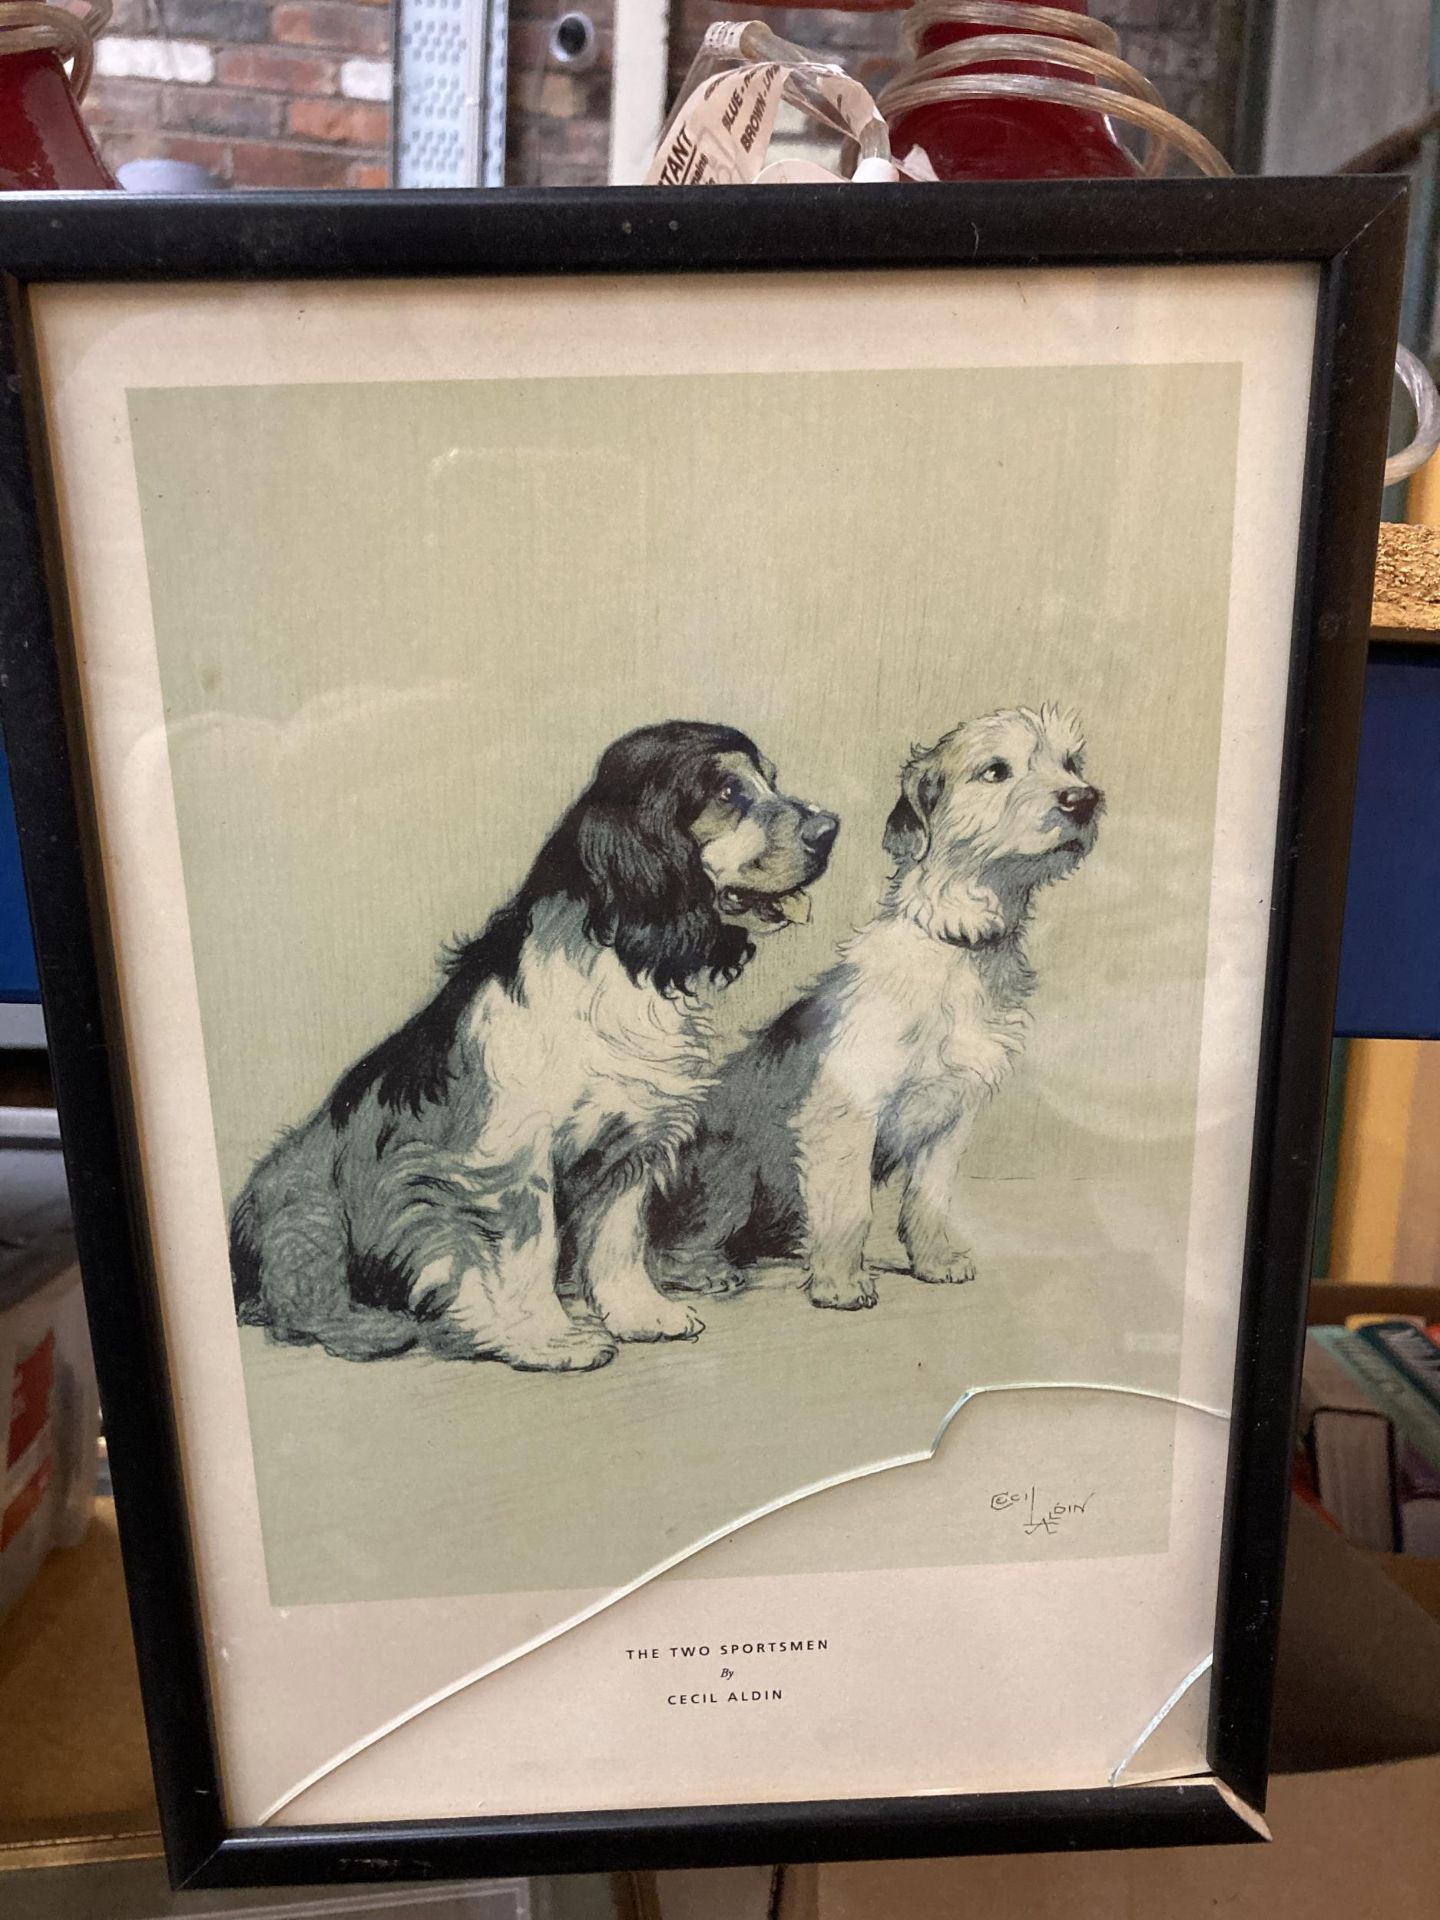 THREE FRAMED CECIL ALDIN PRINTS - 'THE TWO SCAMPS', 'THE TWO FRIENDS' AND 'THE TWO SPORTSMEN' - - Image 4 of 4